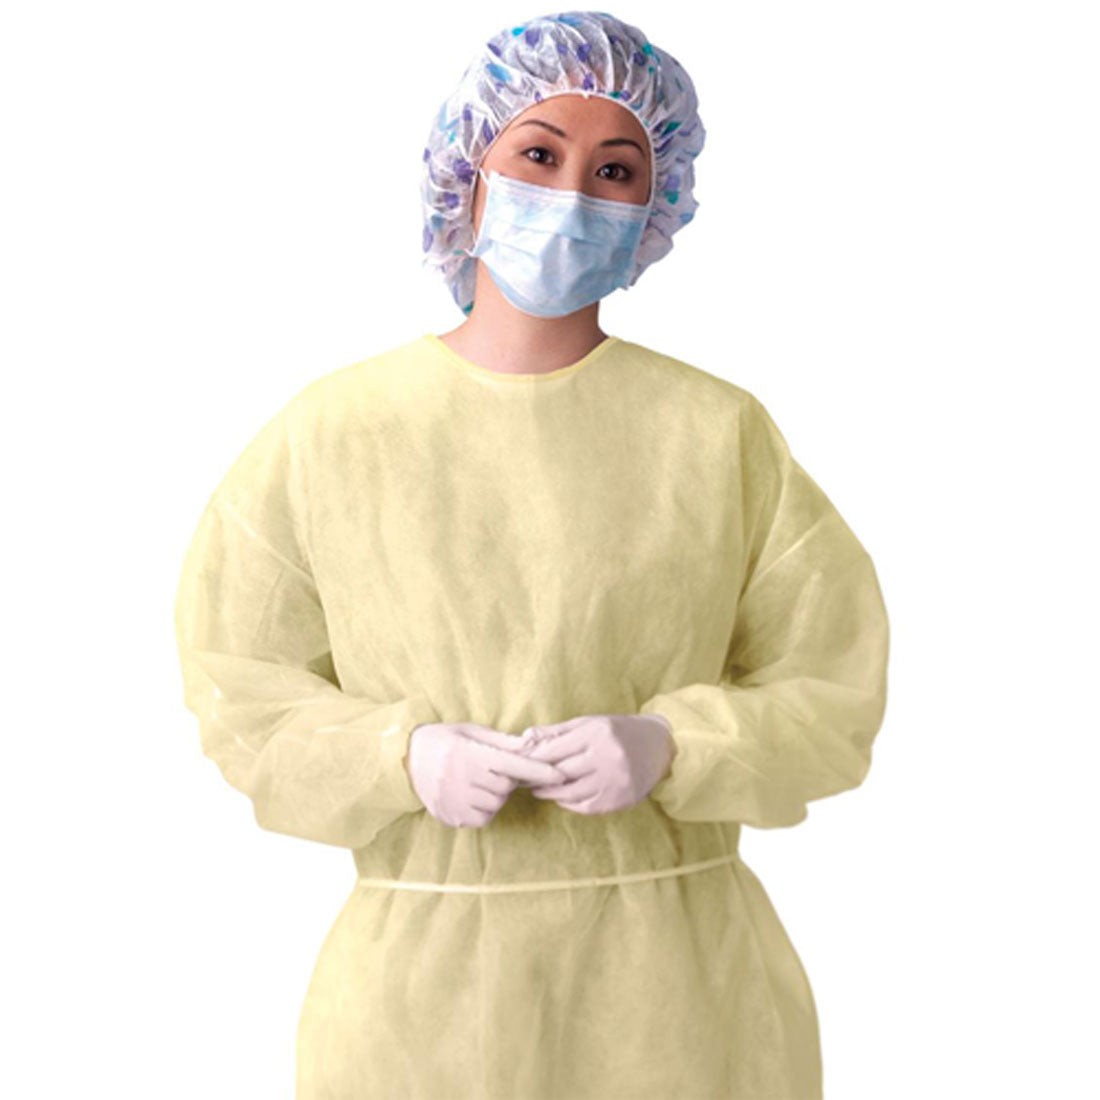 Reusable Level 2 Isolation Gown by CareAline - Powered by Milliken  Perimeter Barrier Fabric